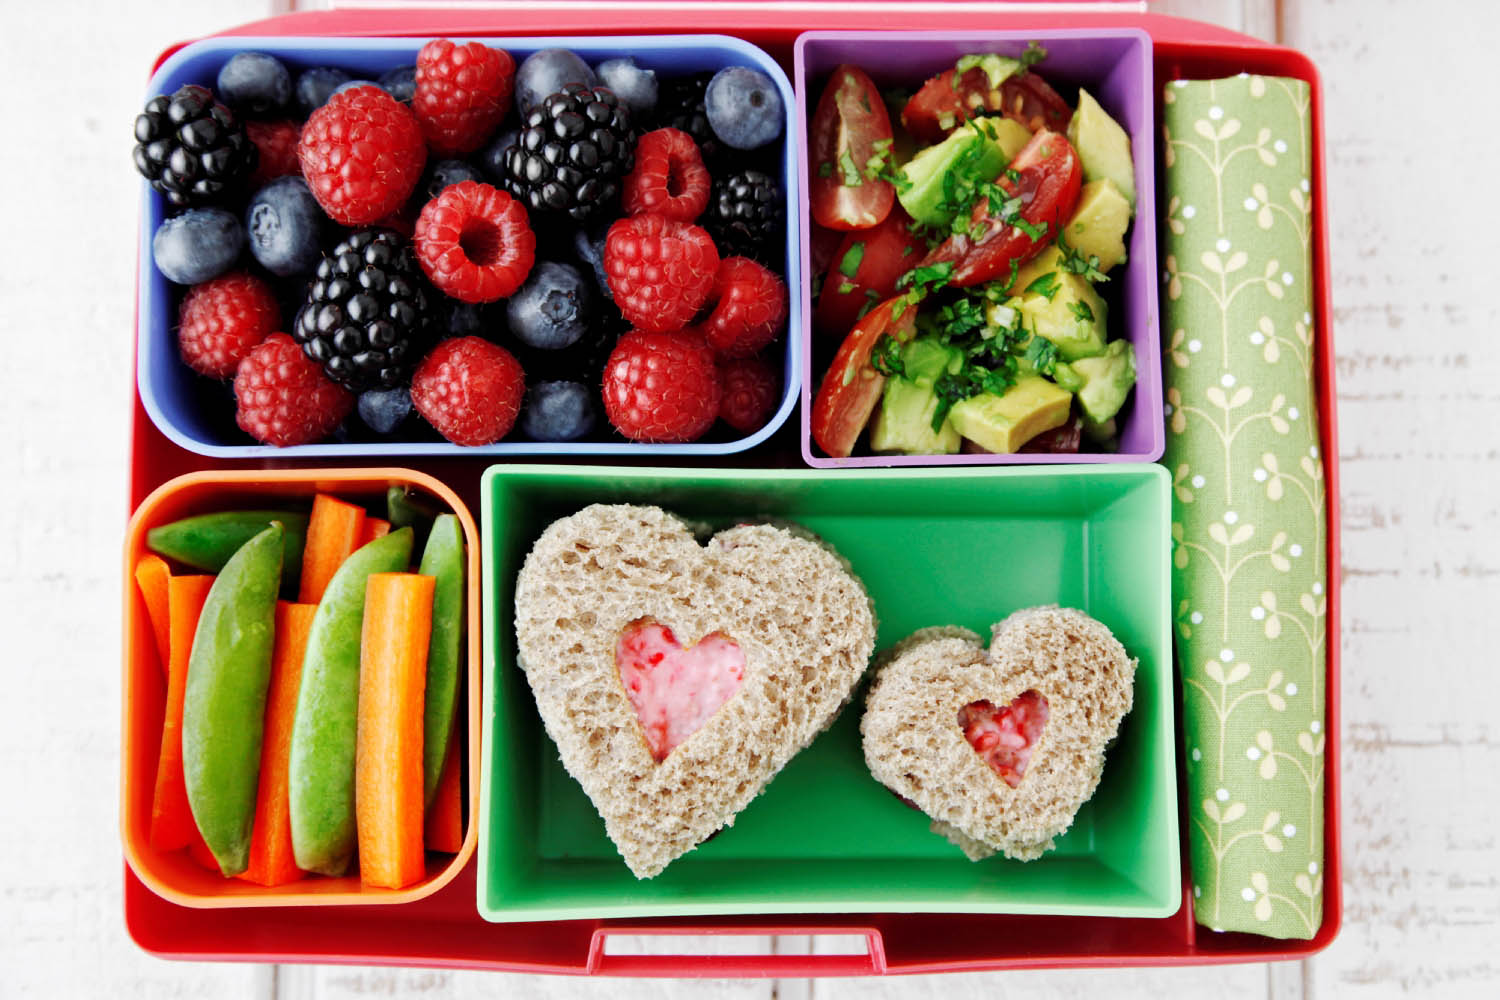 Fun and Easy Lunchtime Bento Box ideas